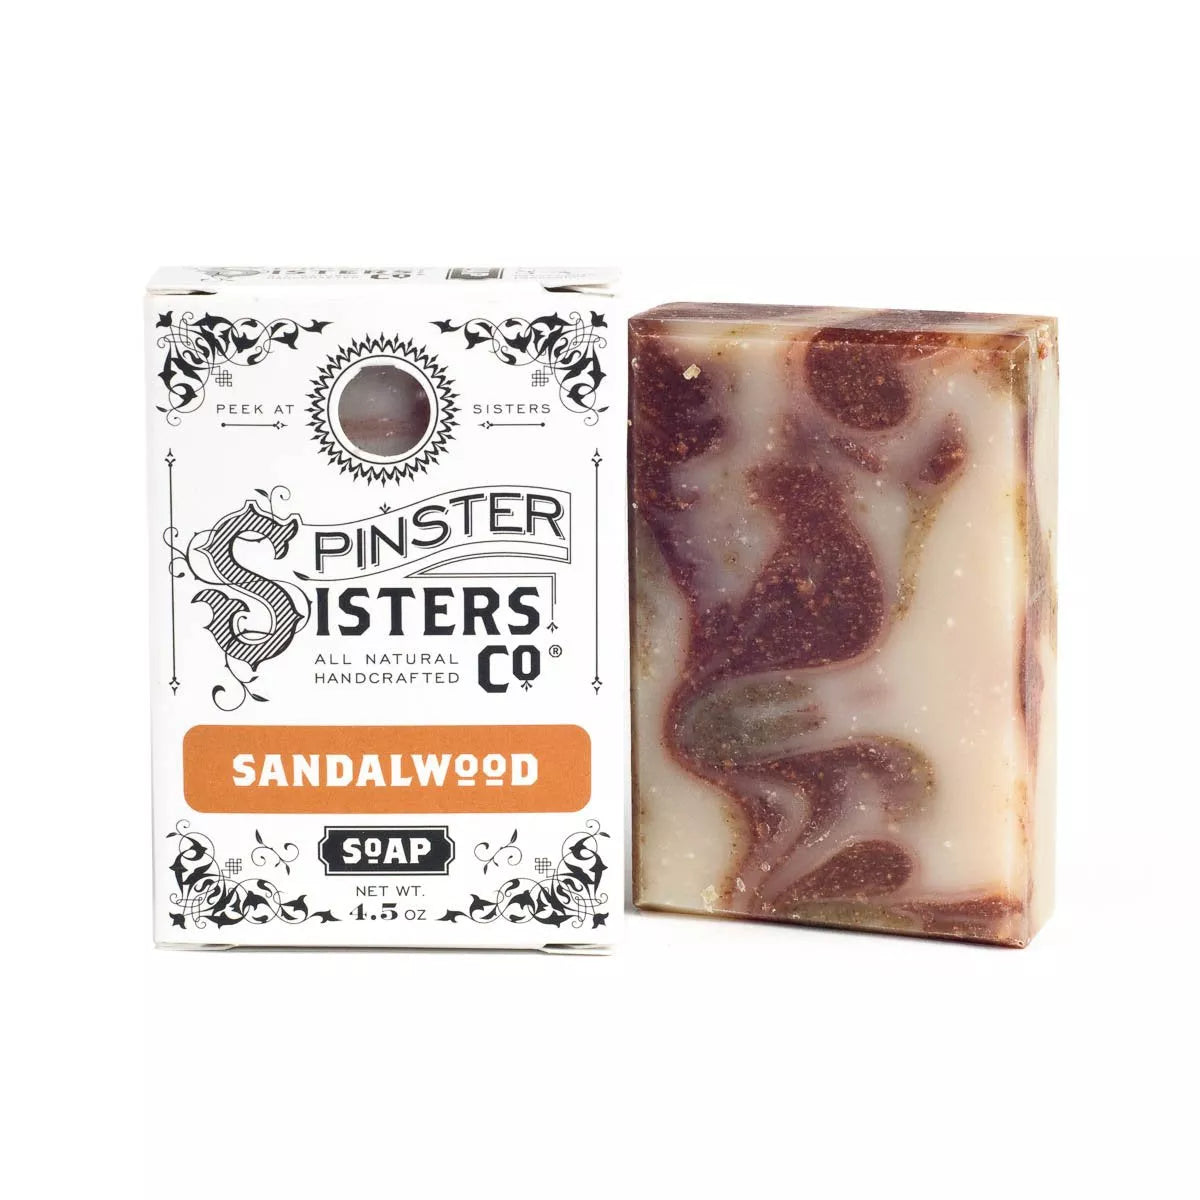 Box that reads Sandlalwood next to a soap bar with dark brown swirls